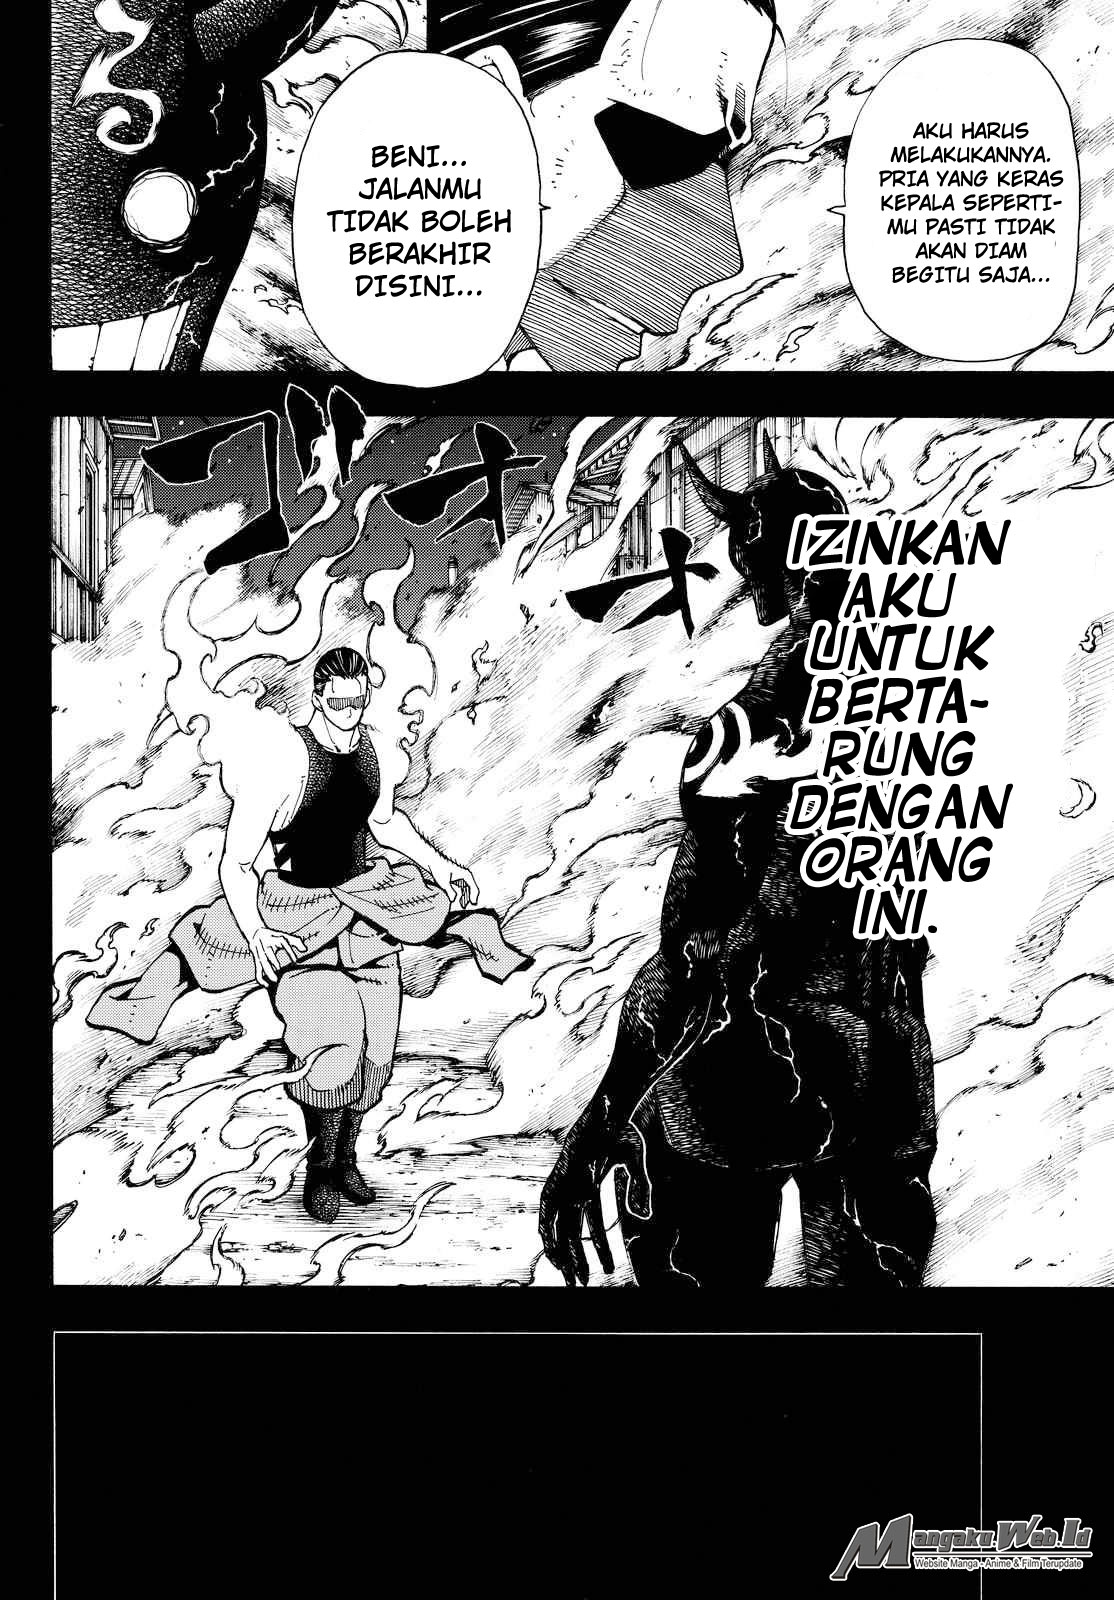 Fire Brigade of Flames Chapter 42